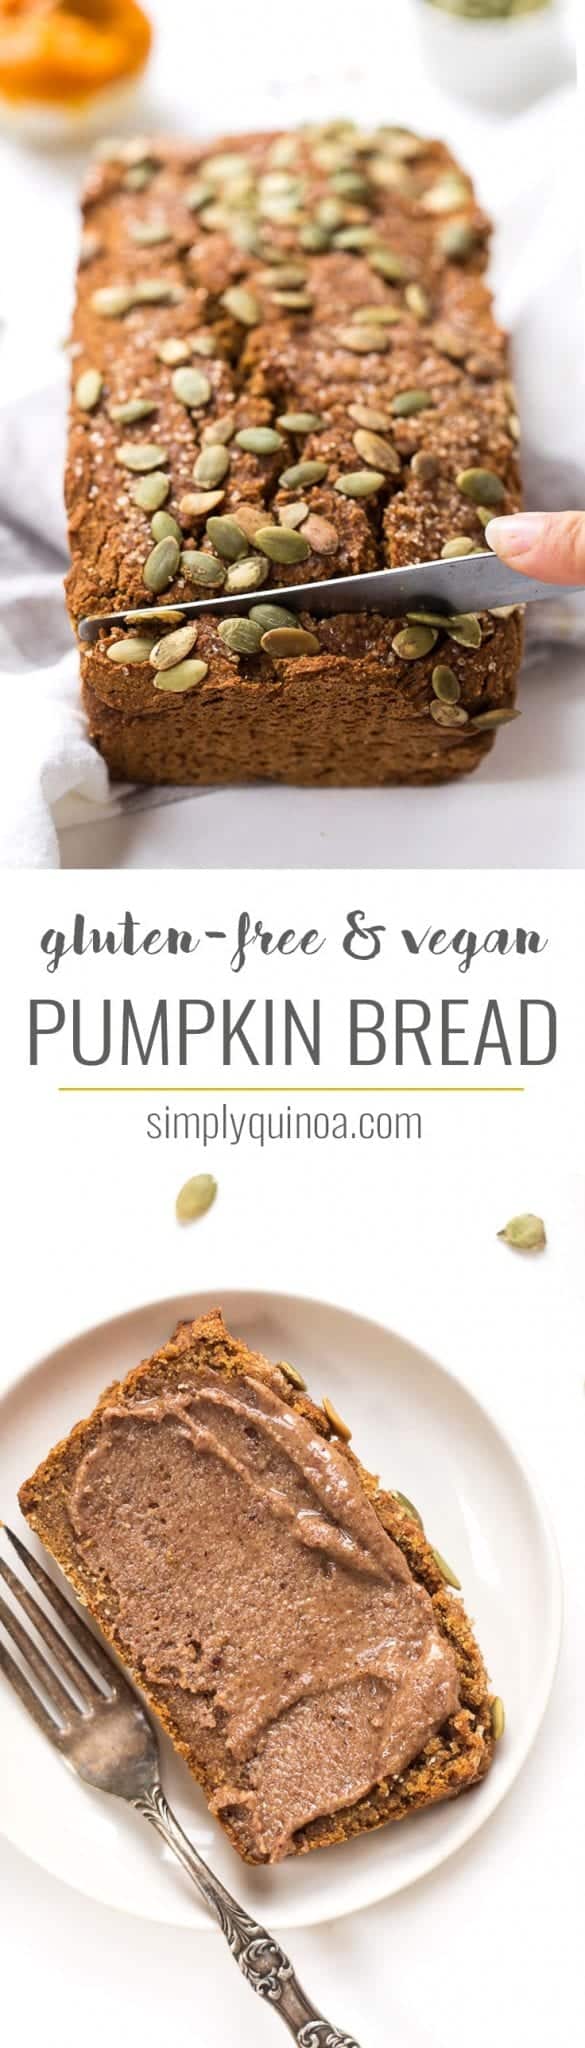 This HEALTHY Gluten-Free + Vegan Pumpkin Bread recipe is packed with protein, fiber and healthy fats. It's also low in sugar and is the perfect breakfast!